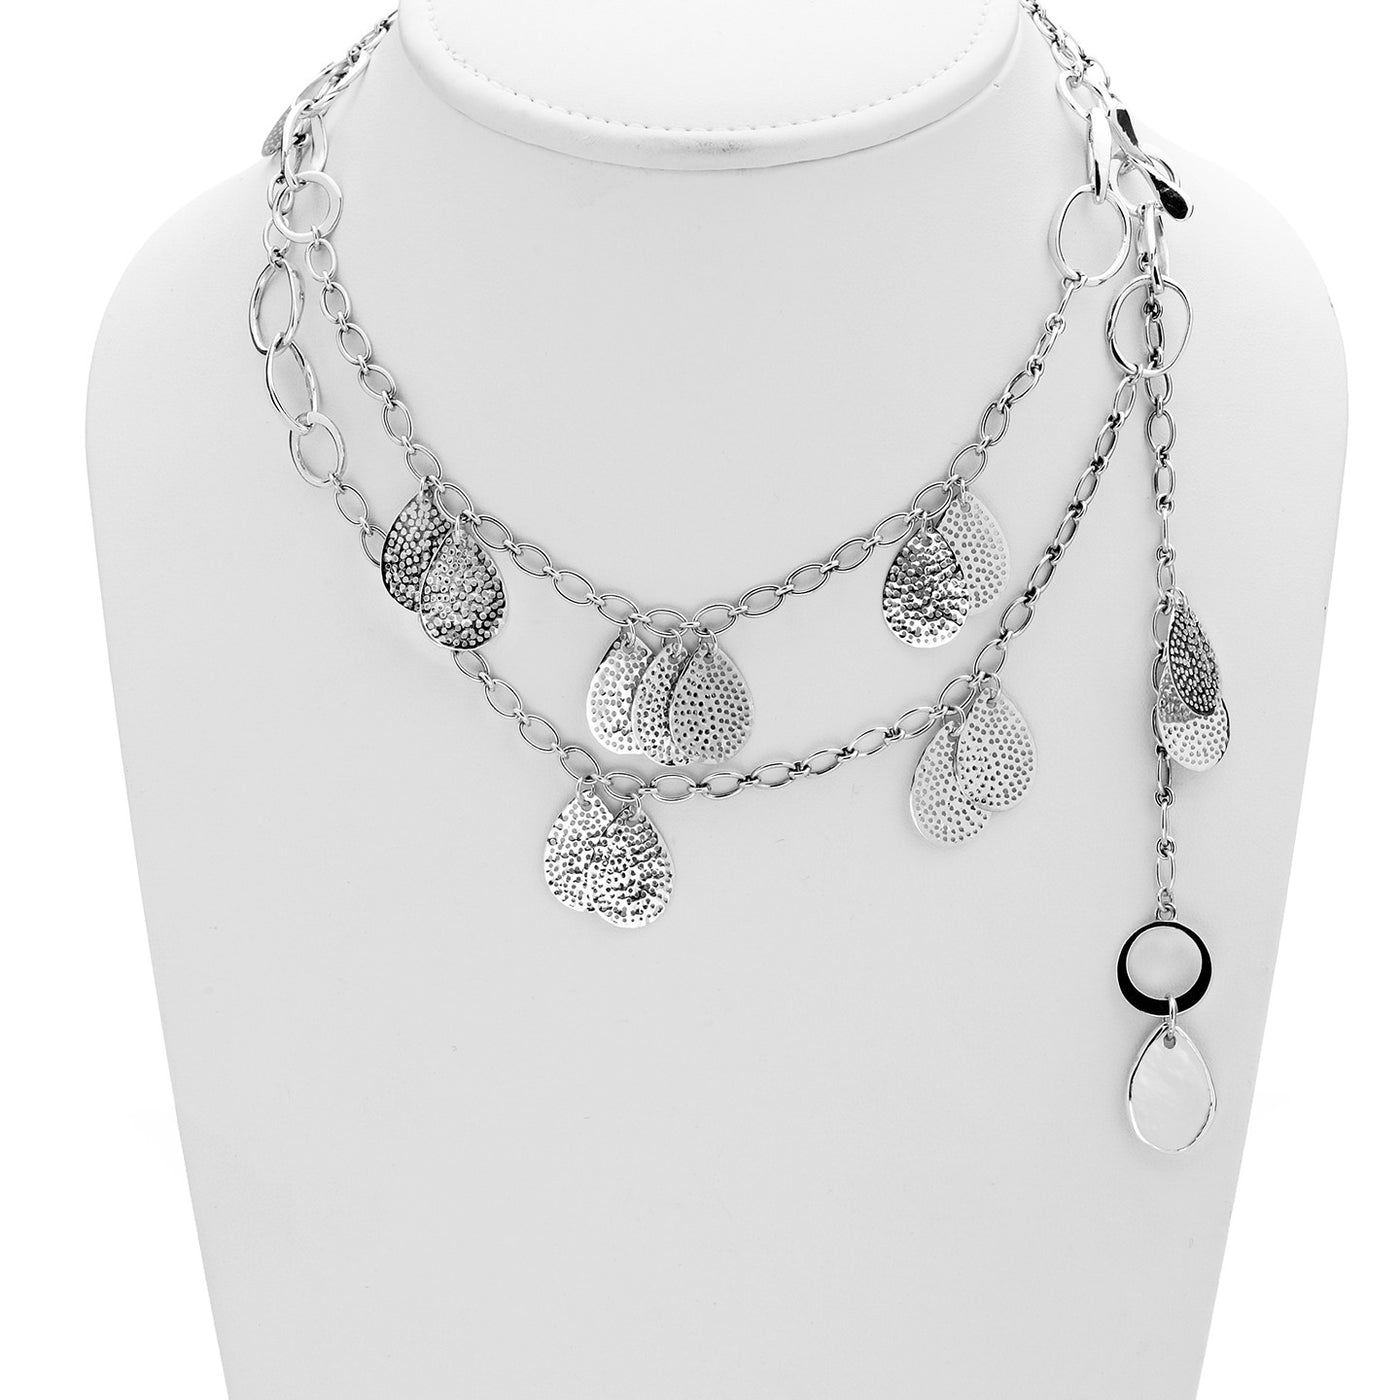 Forget Me Knot Flutter Sterling Silver Necklace - Cynthia Gale New York Jewelry